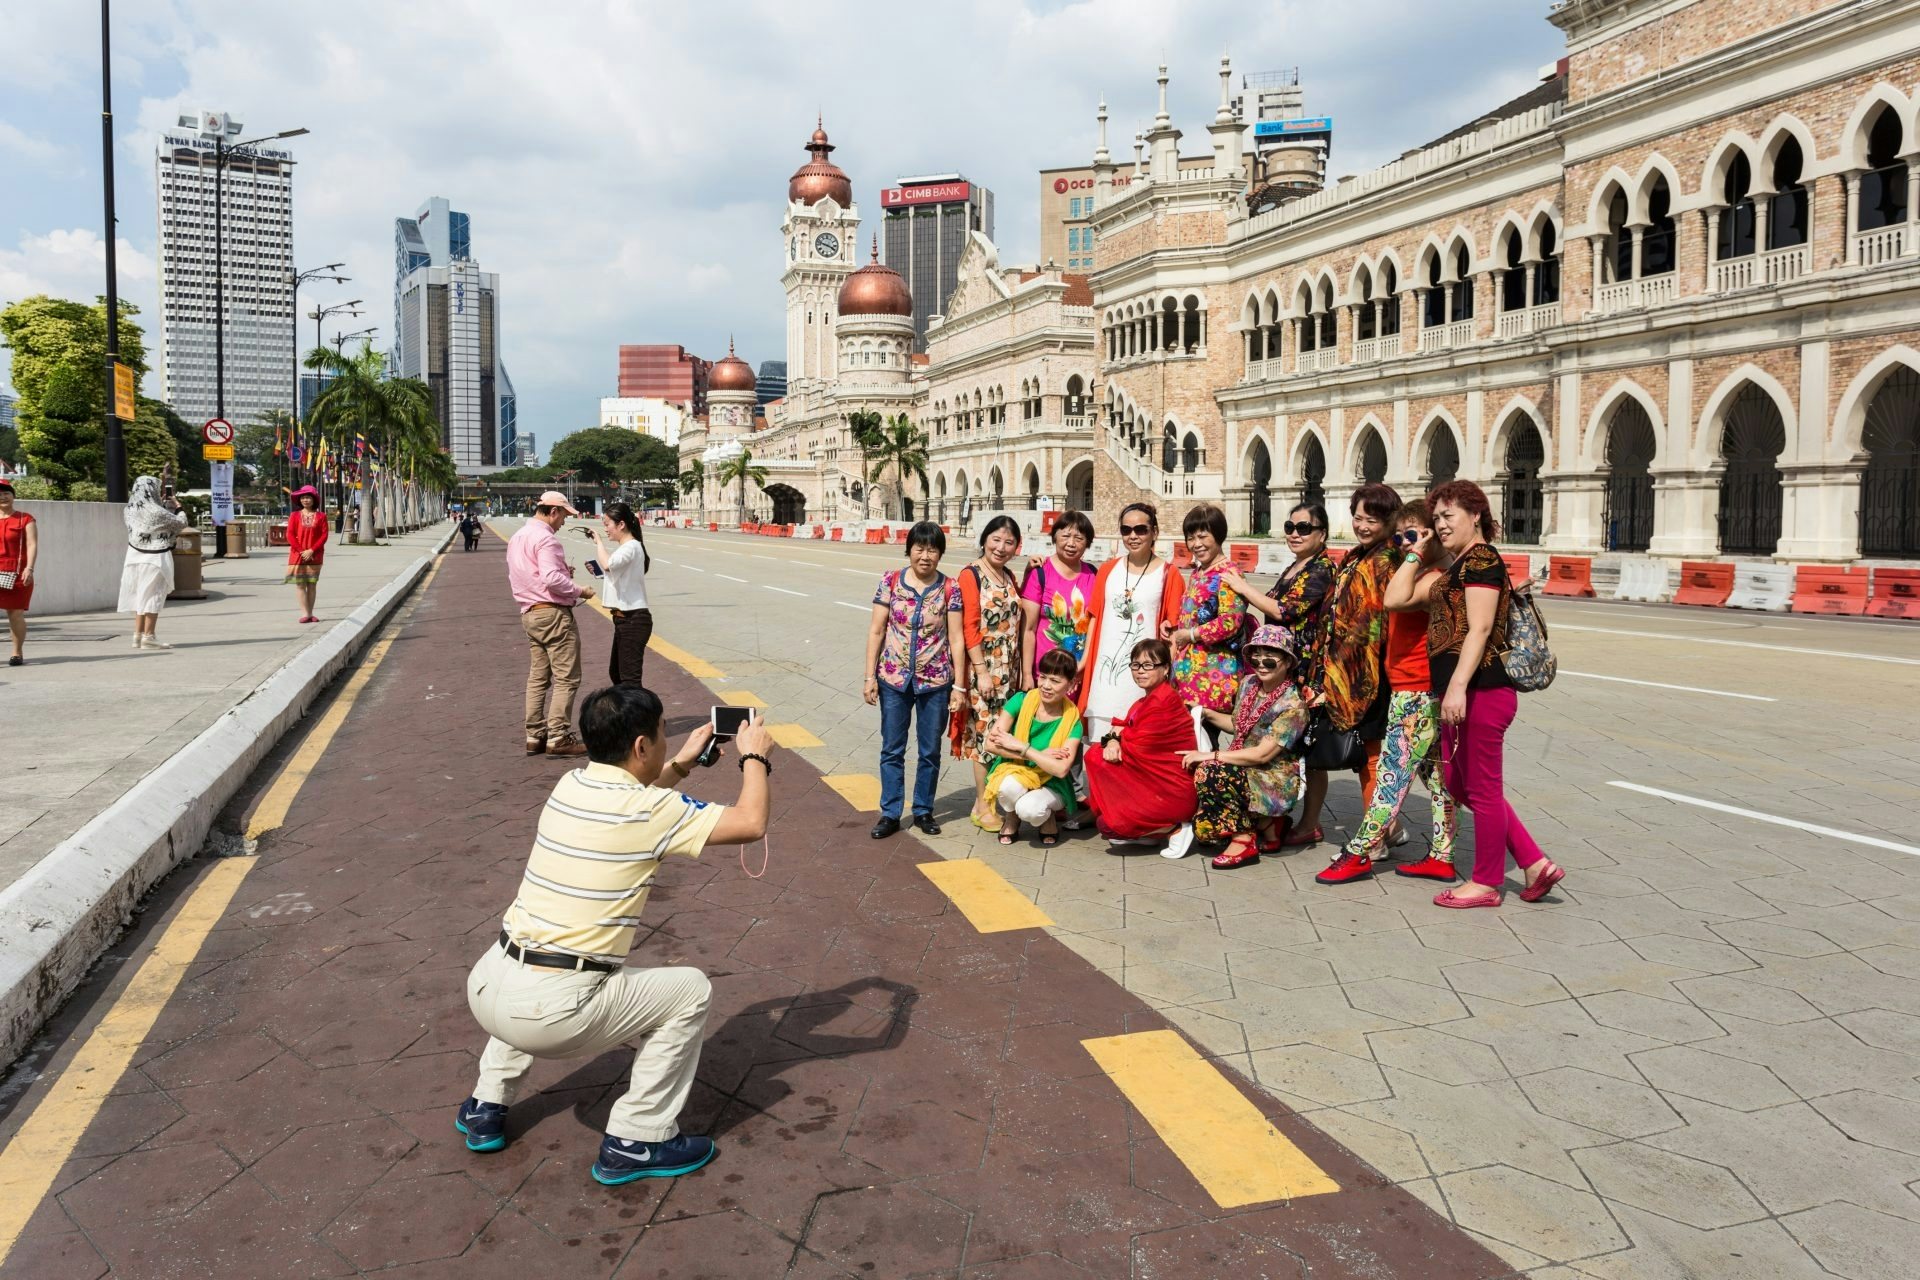 Chinese tourists pose for a photo in Kuala Lumpur, Malaysia. Tencent's latest move is designed to encourage more local businesses to adopt WeChat Pay and facilitate Chinese tourism. Photo: Shutterstock